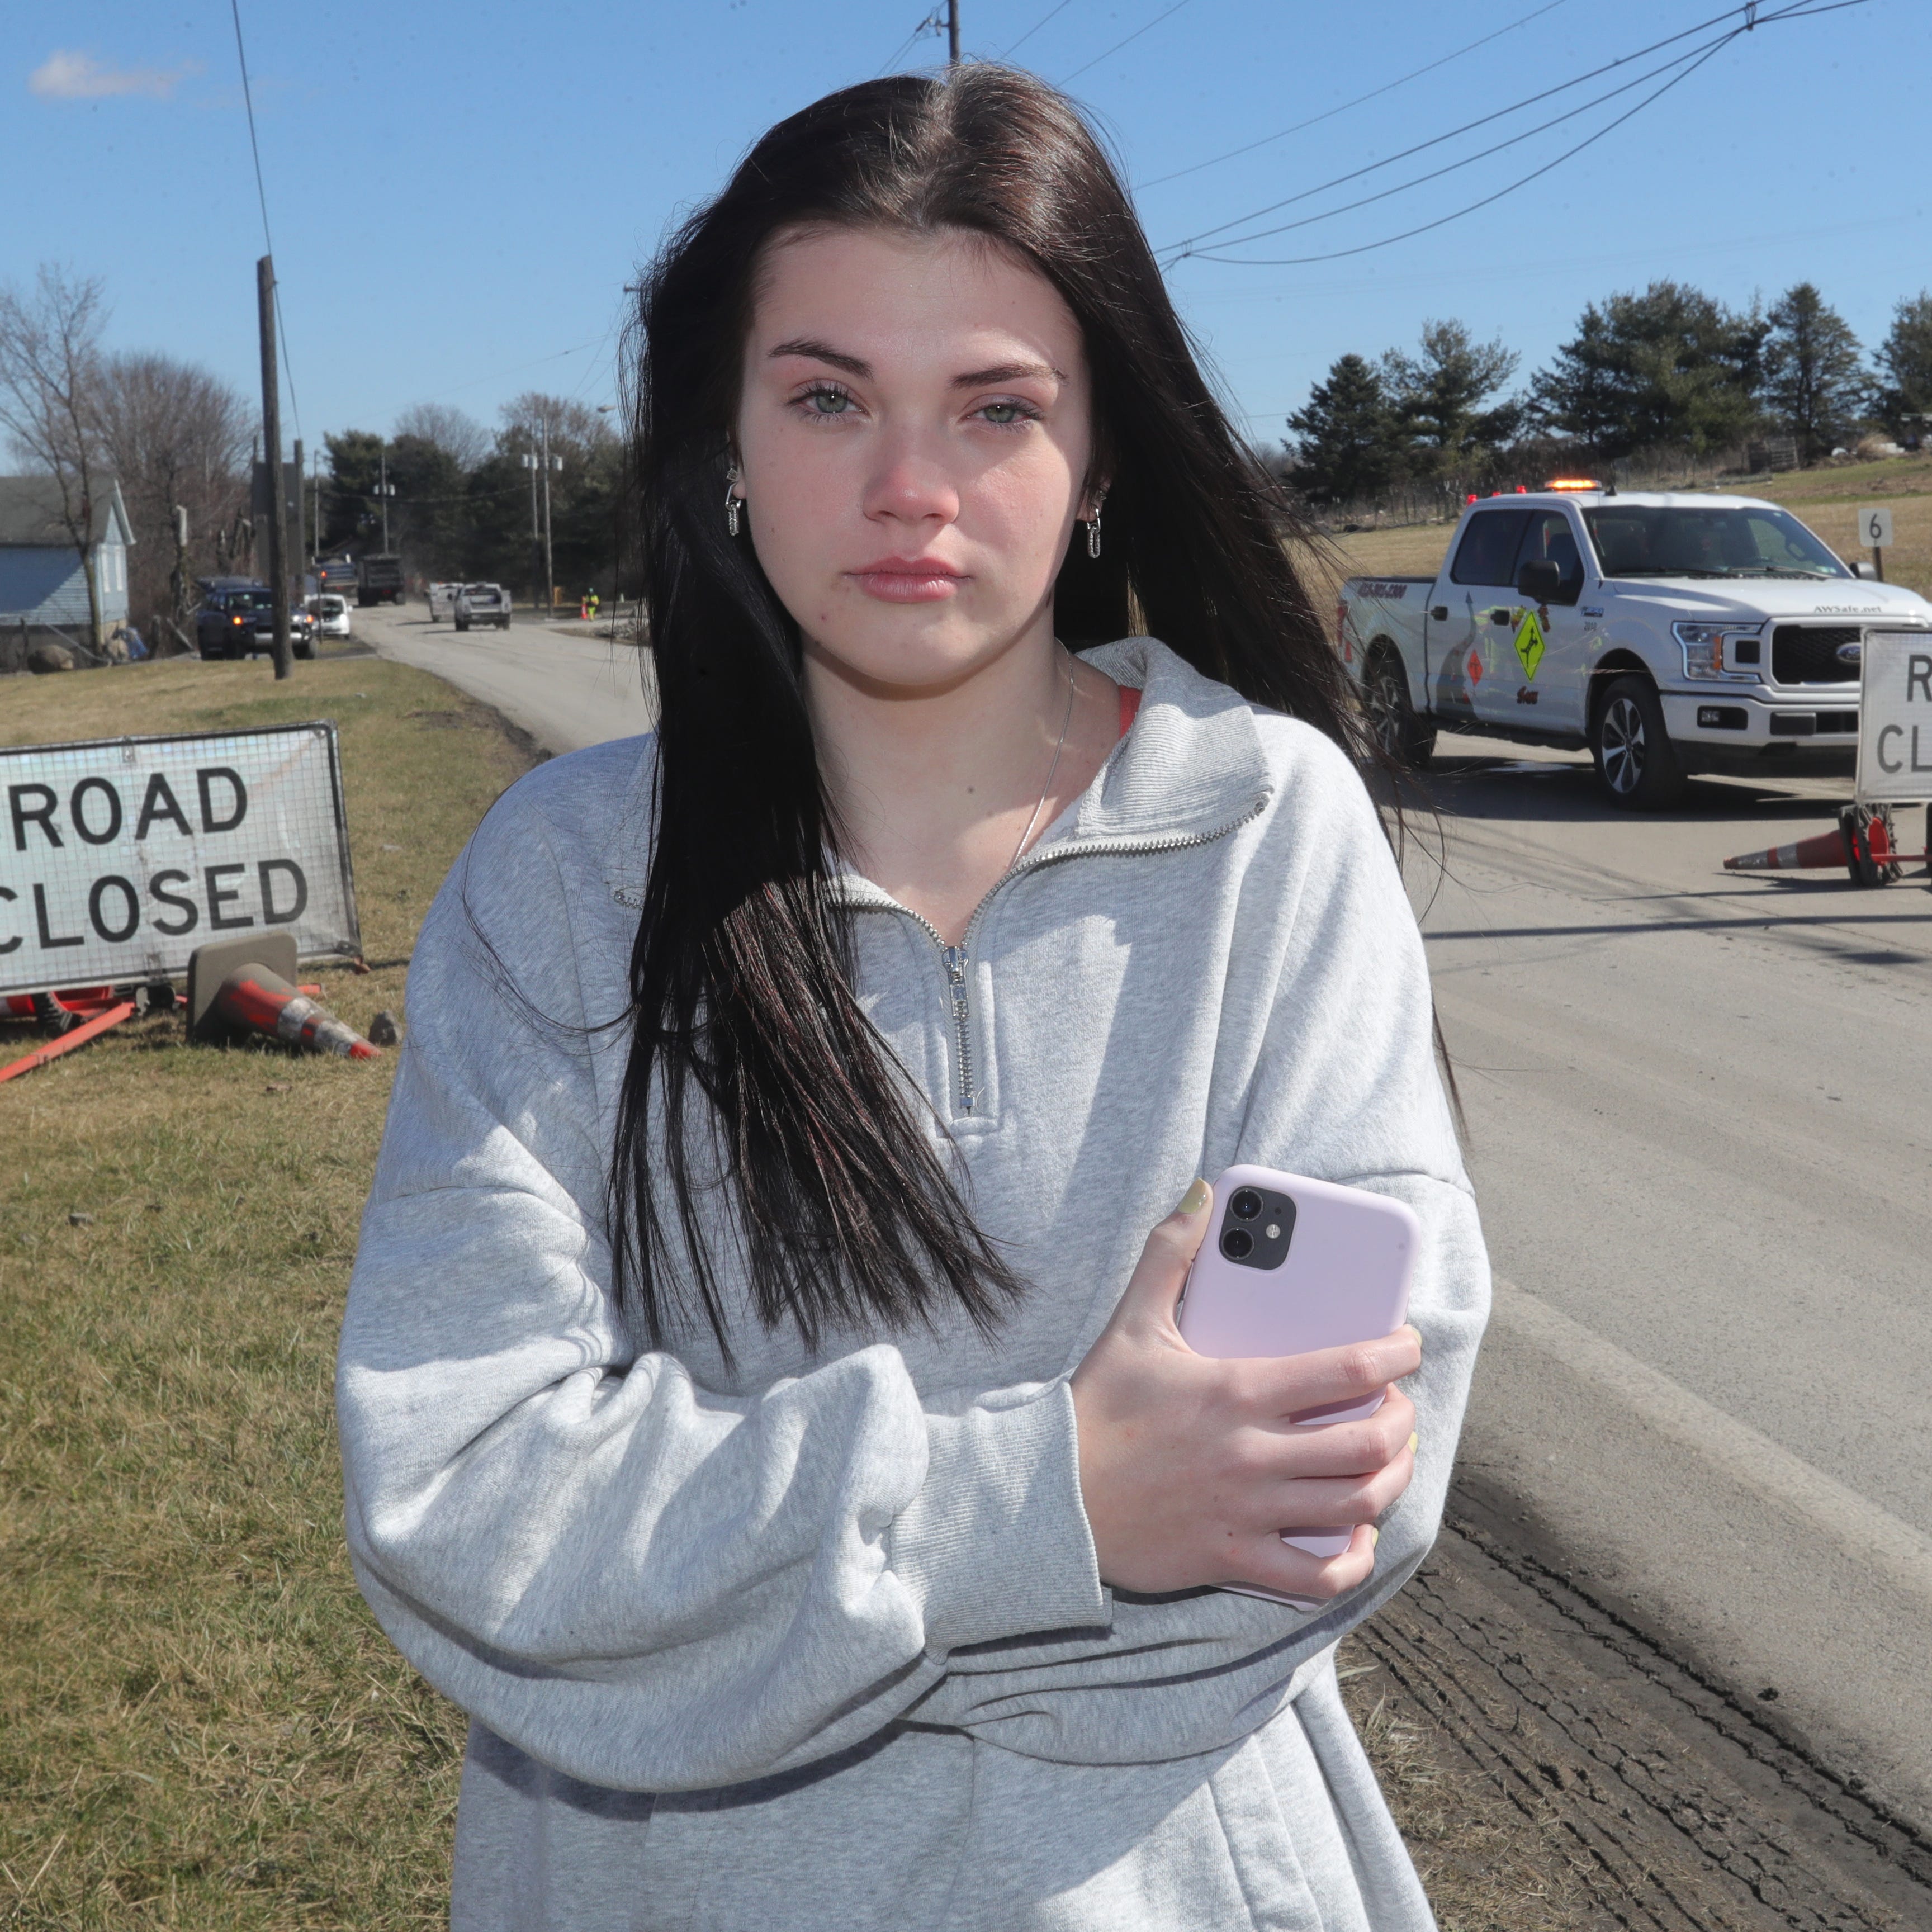 Cami Kridler, 15, was possibly the first to call 911 after seeing the Norfolk Southern train derailment and explosion on Feb. 3. She is shown Tuesday, March 7, 2023, in East Palestine.